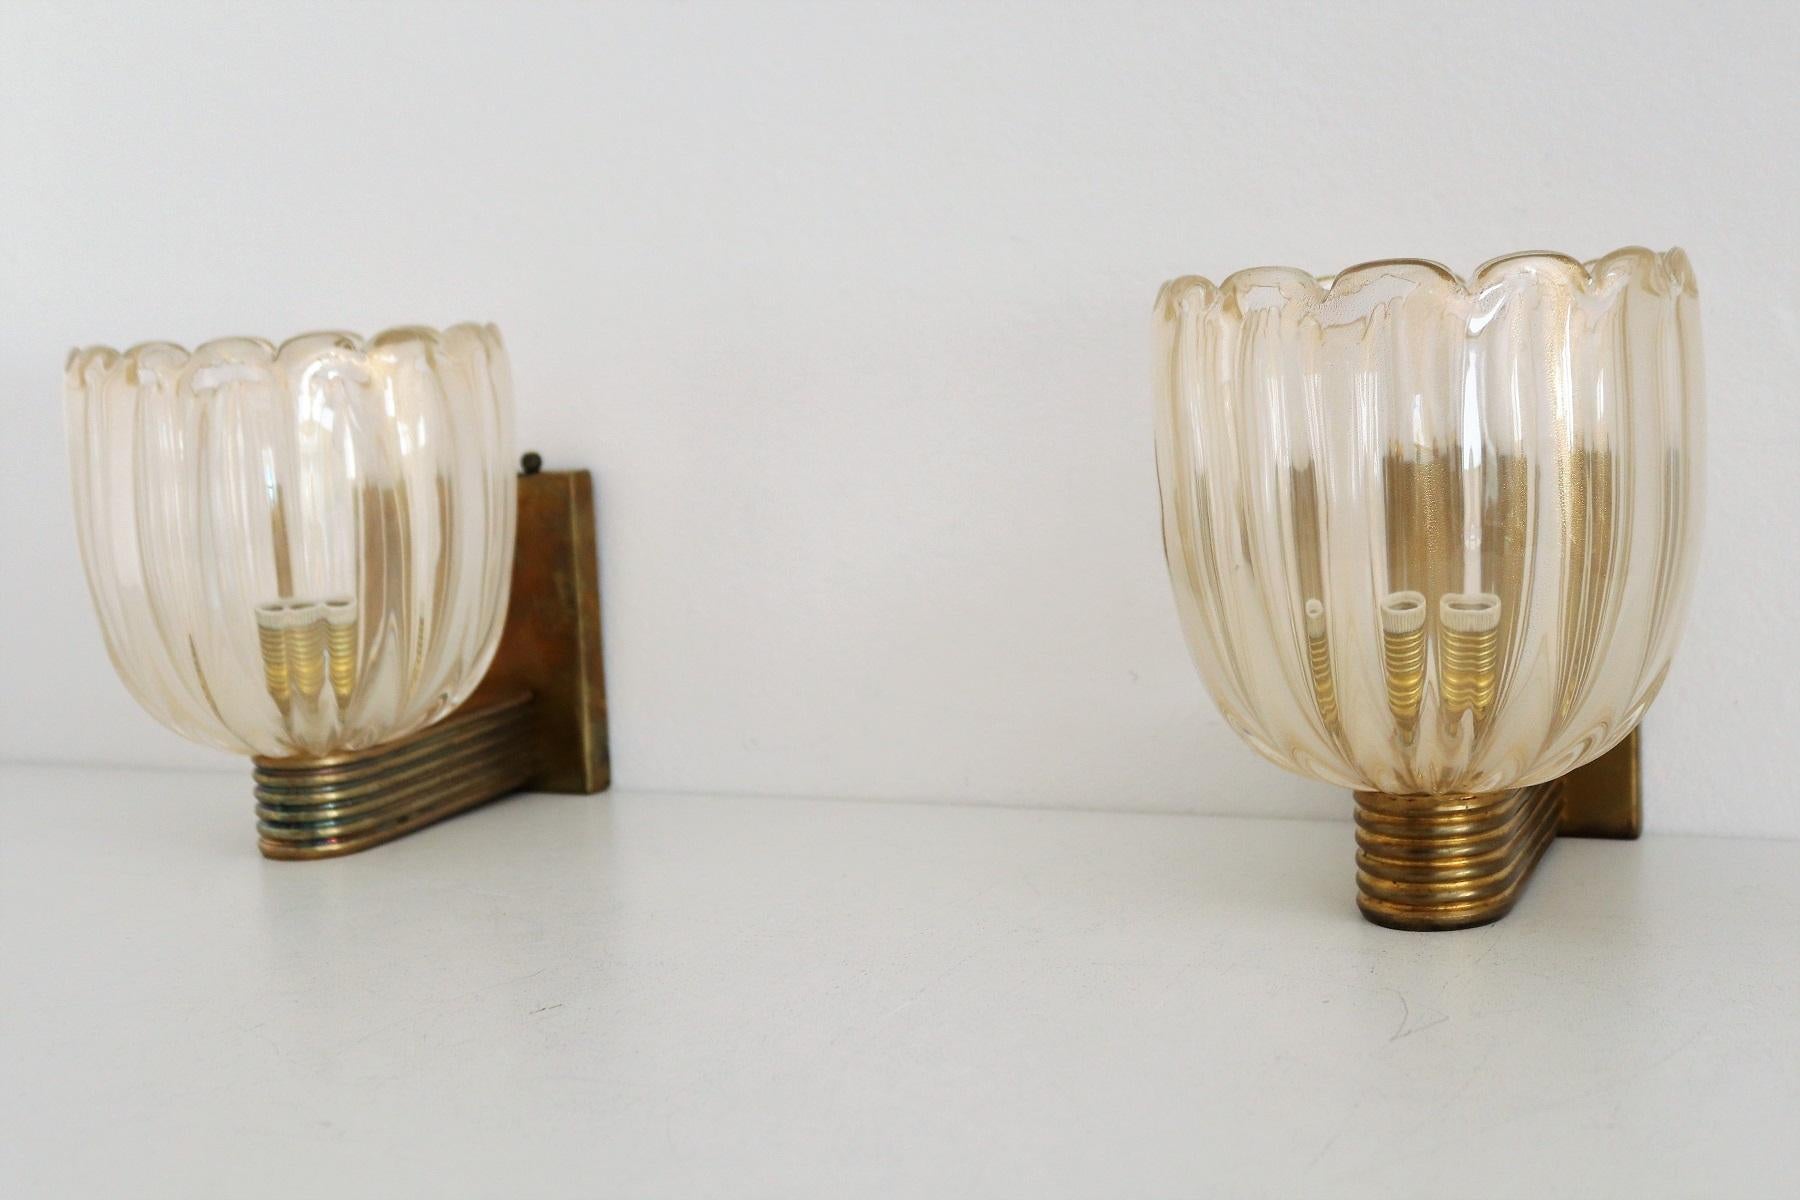 Hand-Crafted Italian Art Deco Style Brass and Murano Glass Wall Lights or Sconces, 1980s